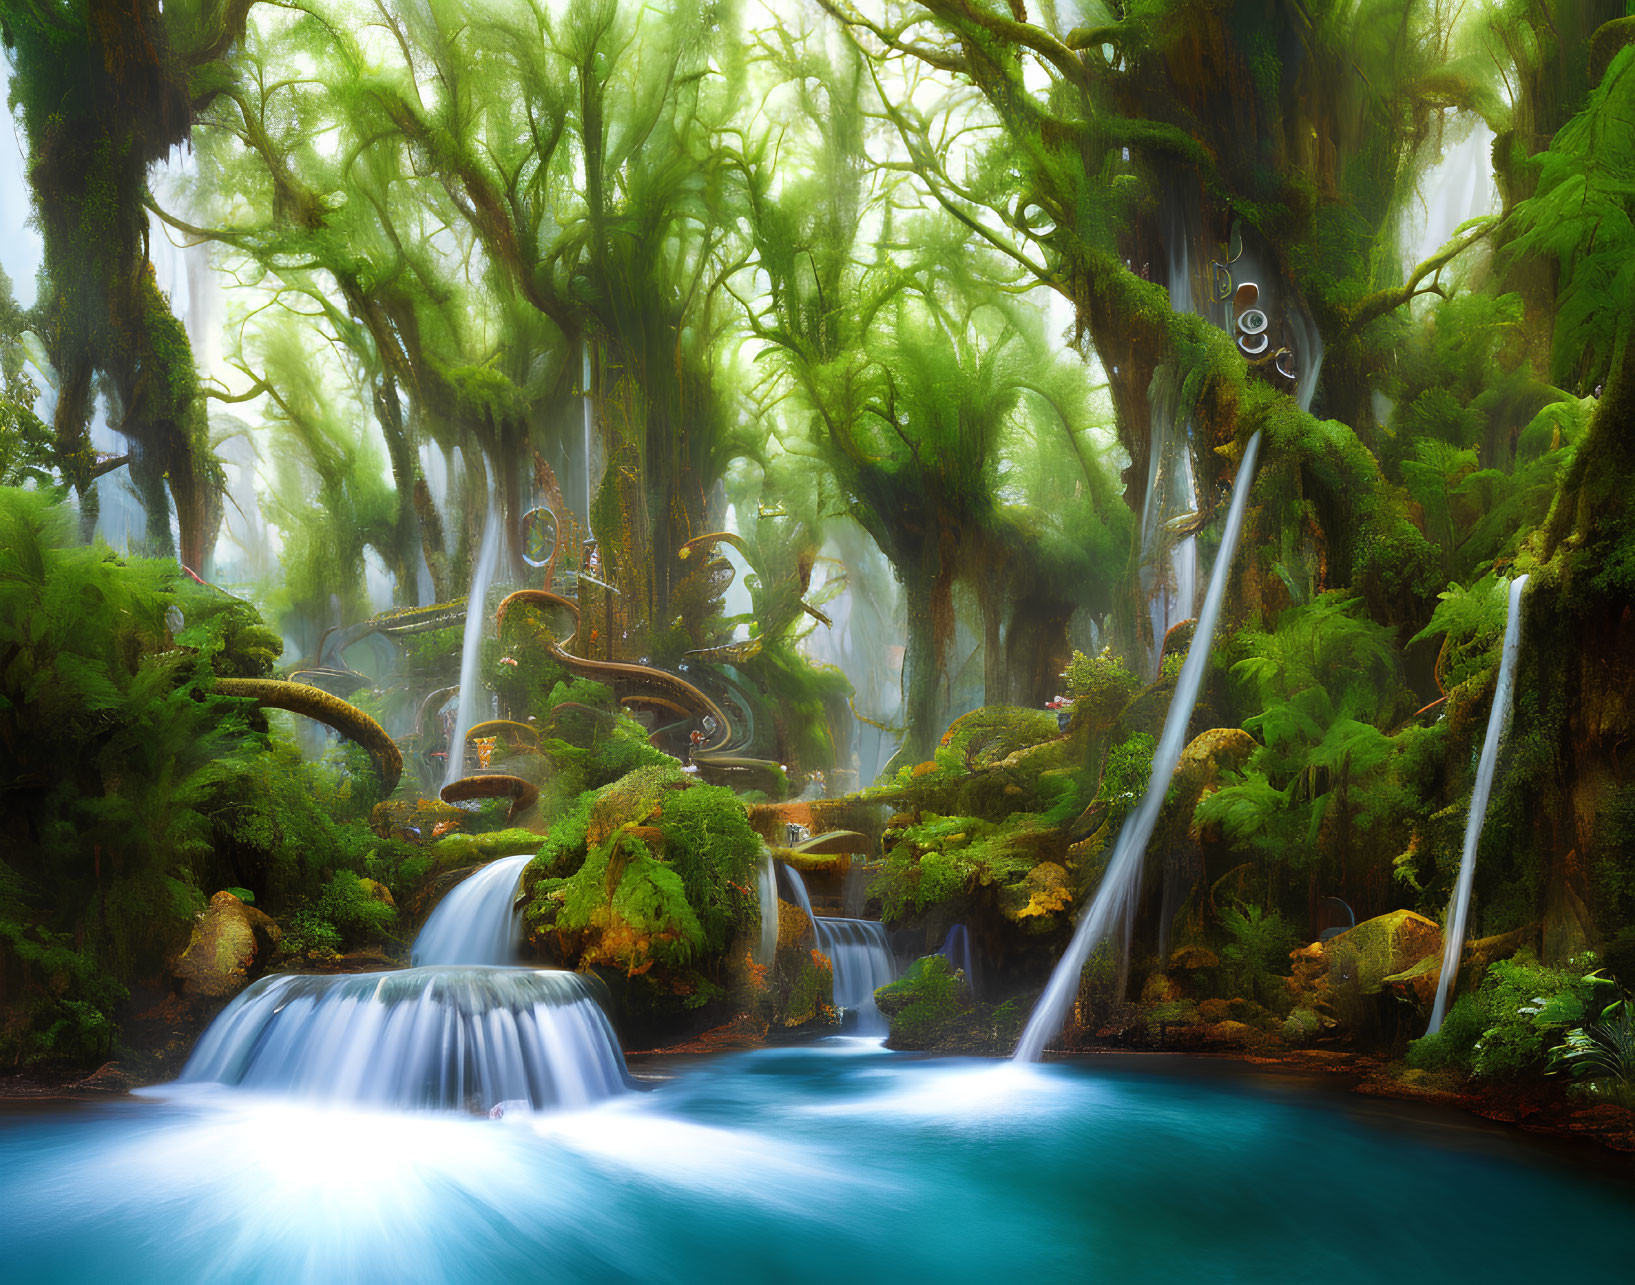 Mystical forest with mist, waterfalls, greenery, twisted trees, and floating orbs